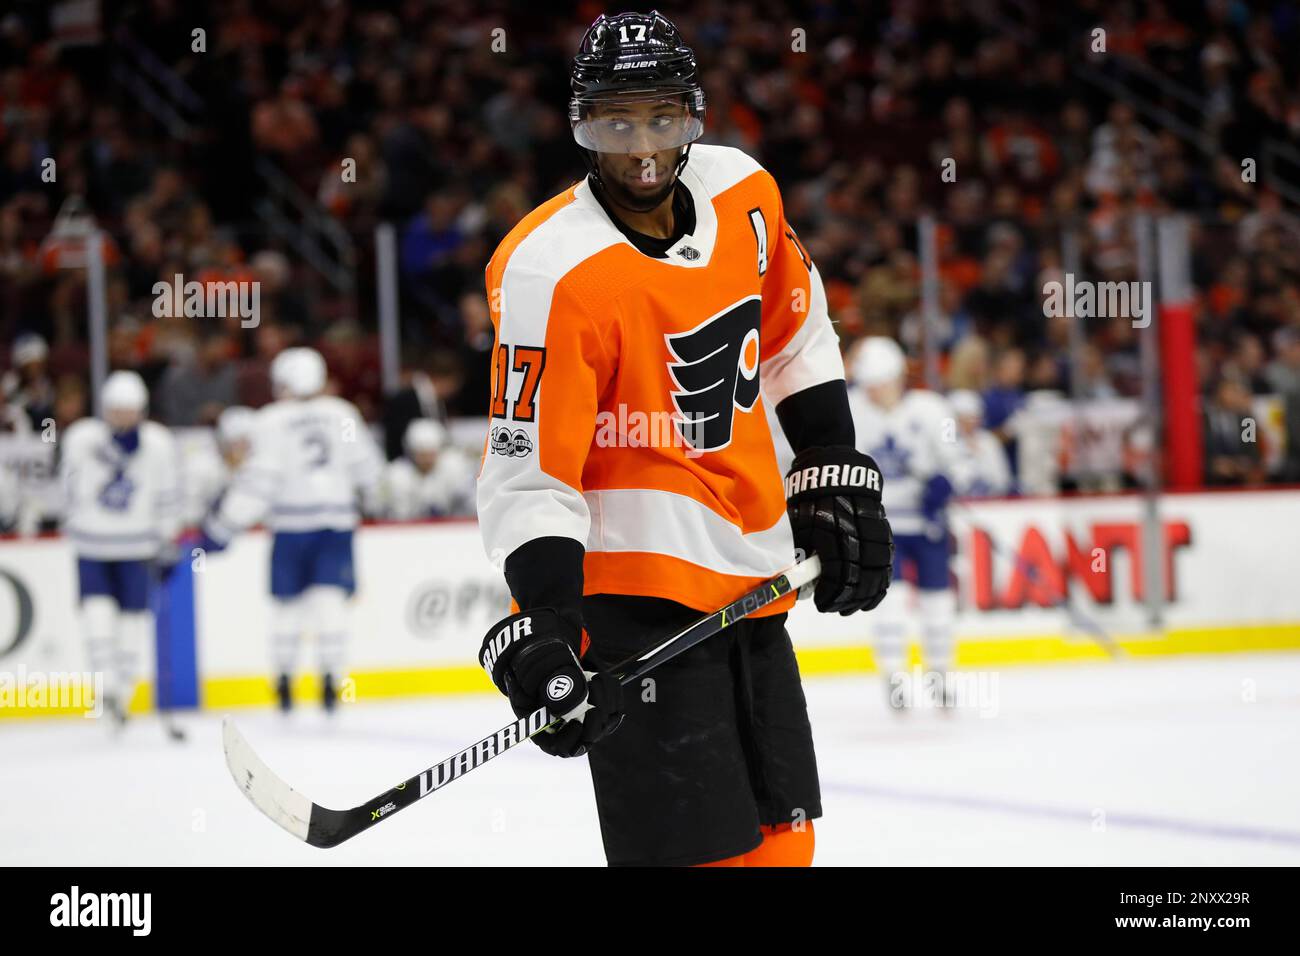 Picture of Wayne Simmonds in Toronto Maple Leafs Jersey